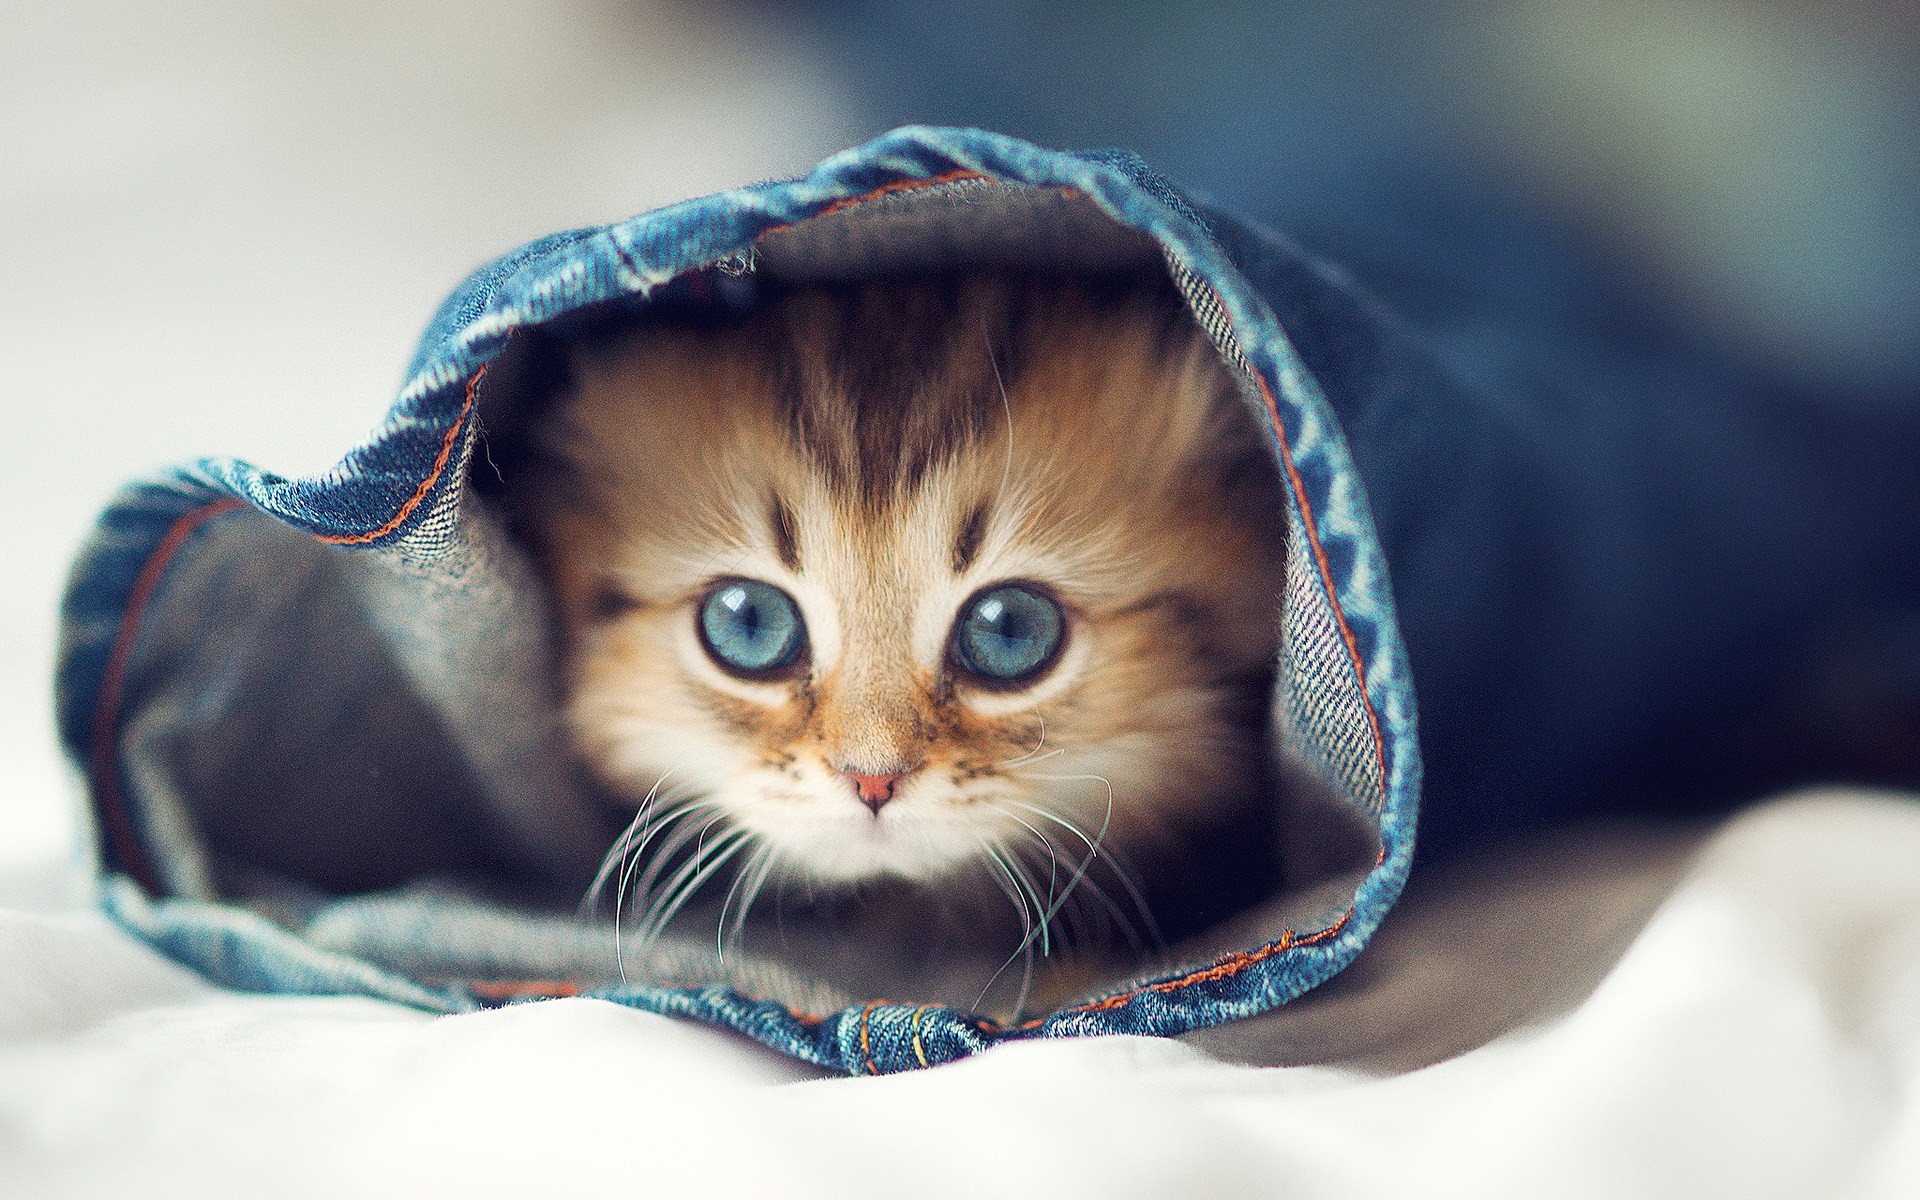 Cutest Wallpapers Ever 59 Pictures